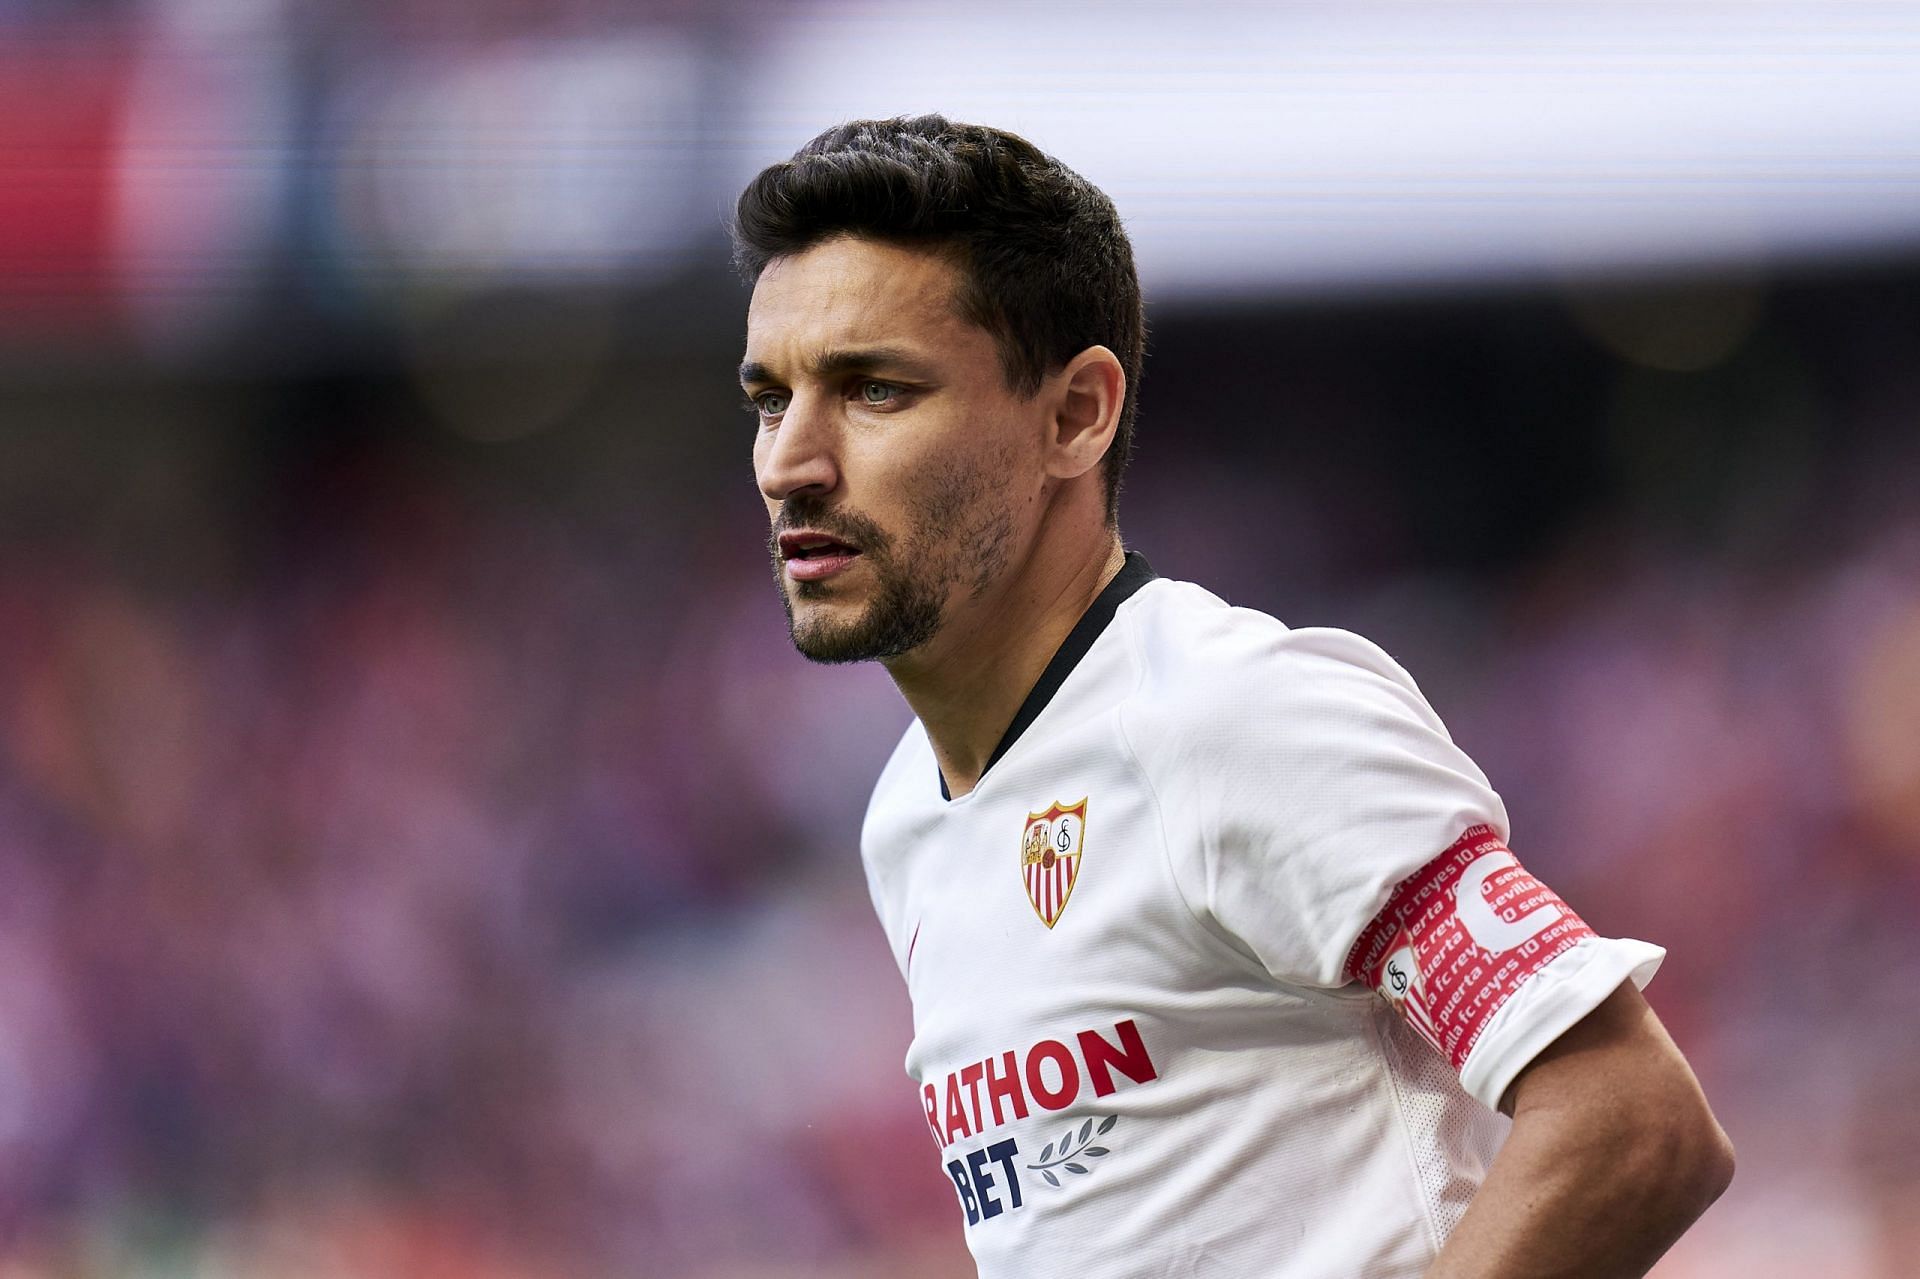 Navas is close to making 600 appearances for Sevilla in all competitions.